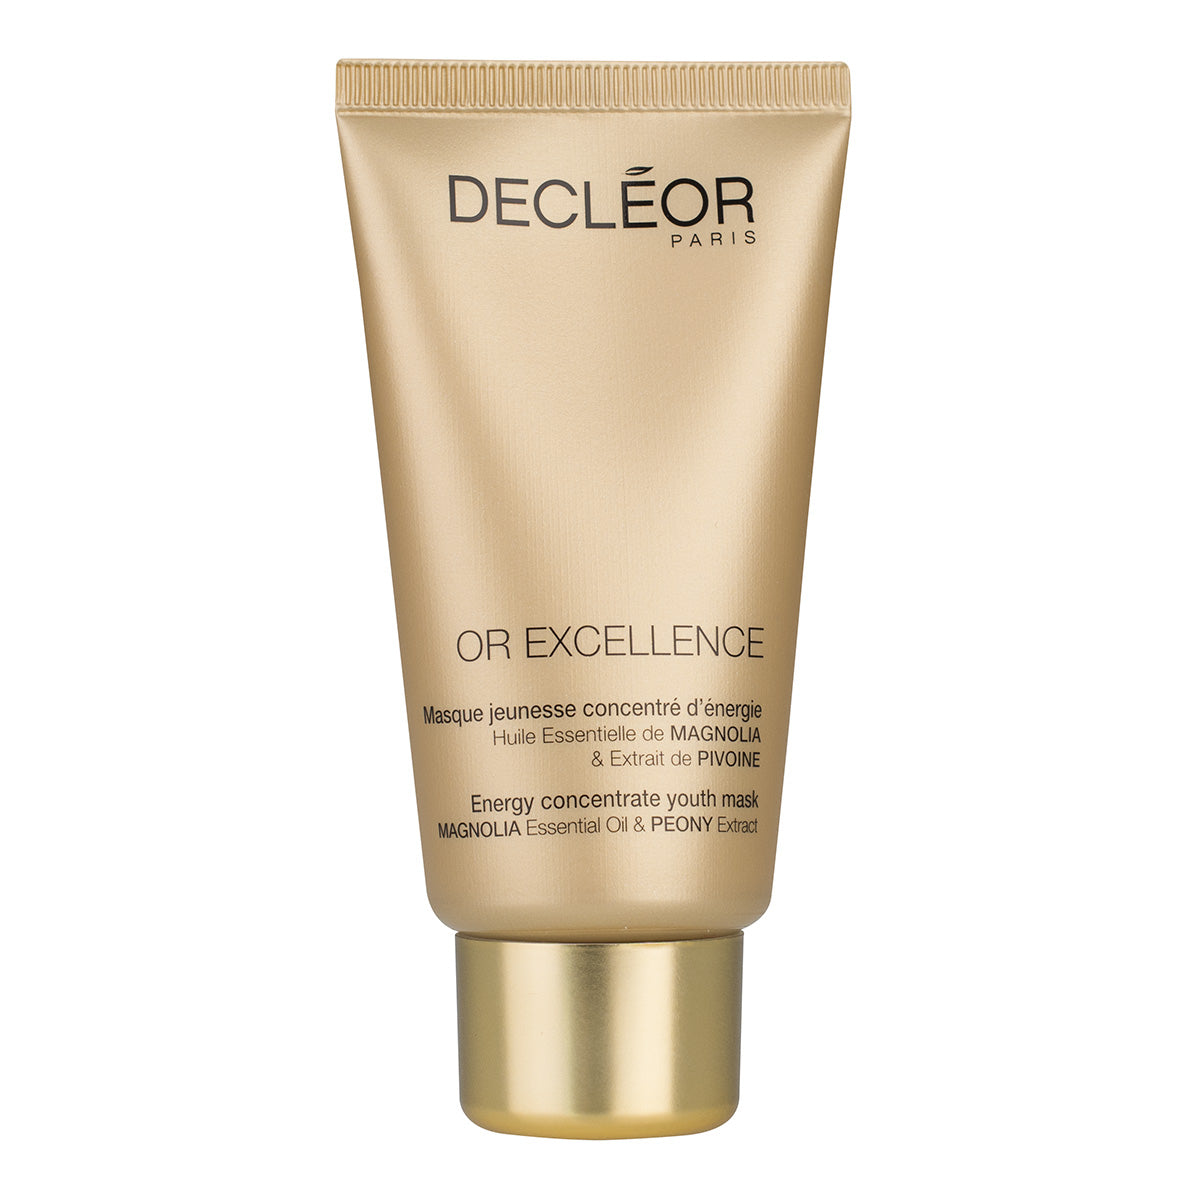 Decleor Orexcellence Energy Concentrate Youth Mask Magnolia & Peony 50ml Image